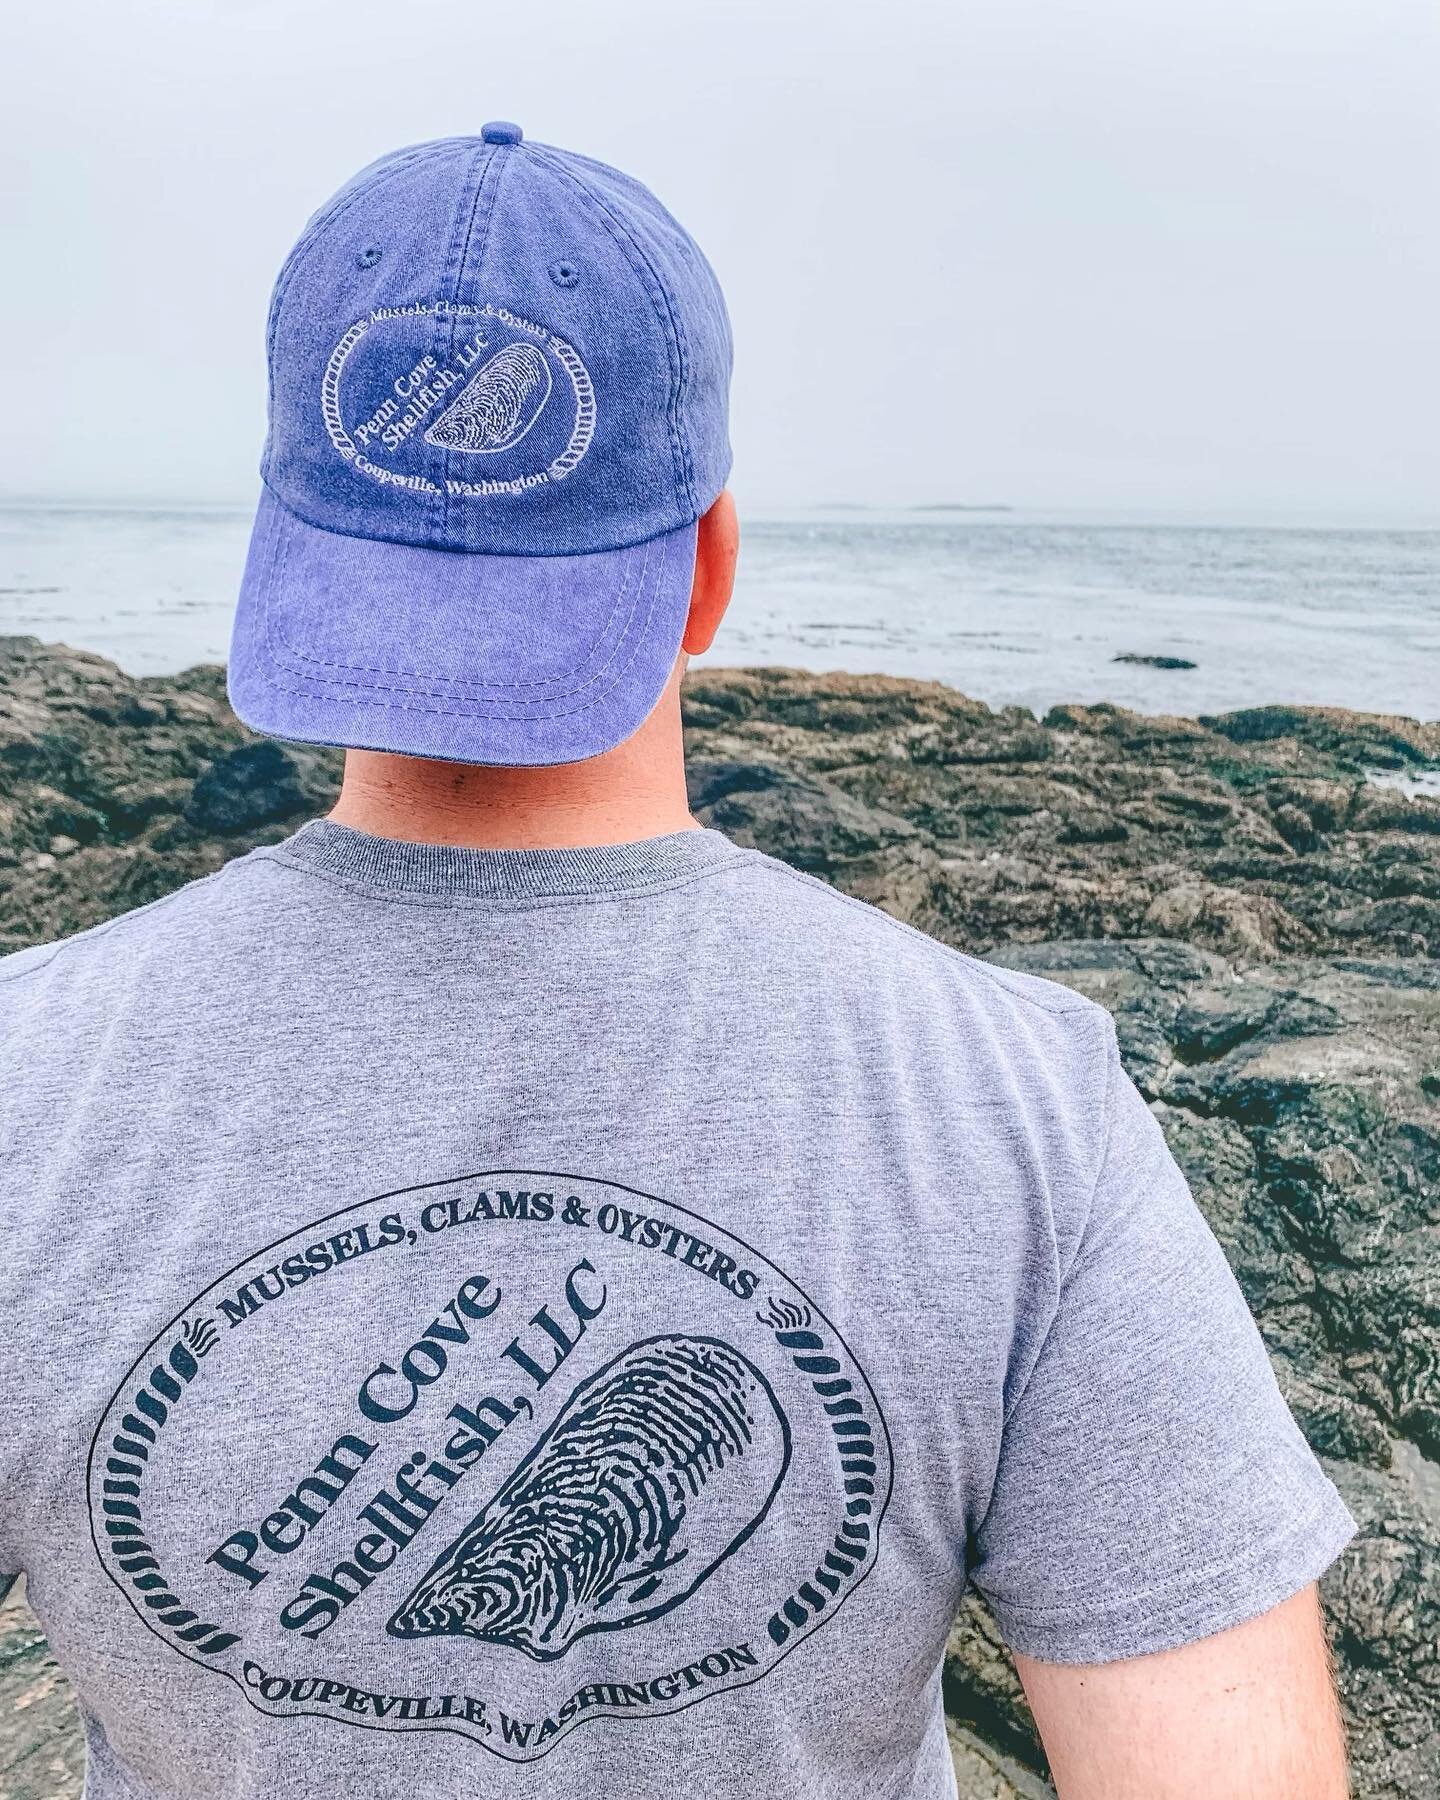 I see it. I like it. I want it. I GOT it. 

Get yours! Link in our bio! 

📲www.penncoveshellfish.com/shop
Ships right to your door! Shipping includes in price! 

More exciting things coming soon! VERY SOON! 

📸 @cali.h.rose 

#mussels #shipping #ov